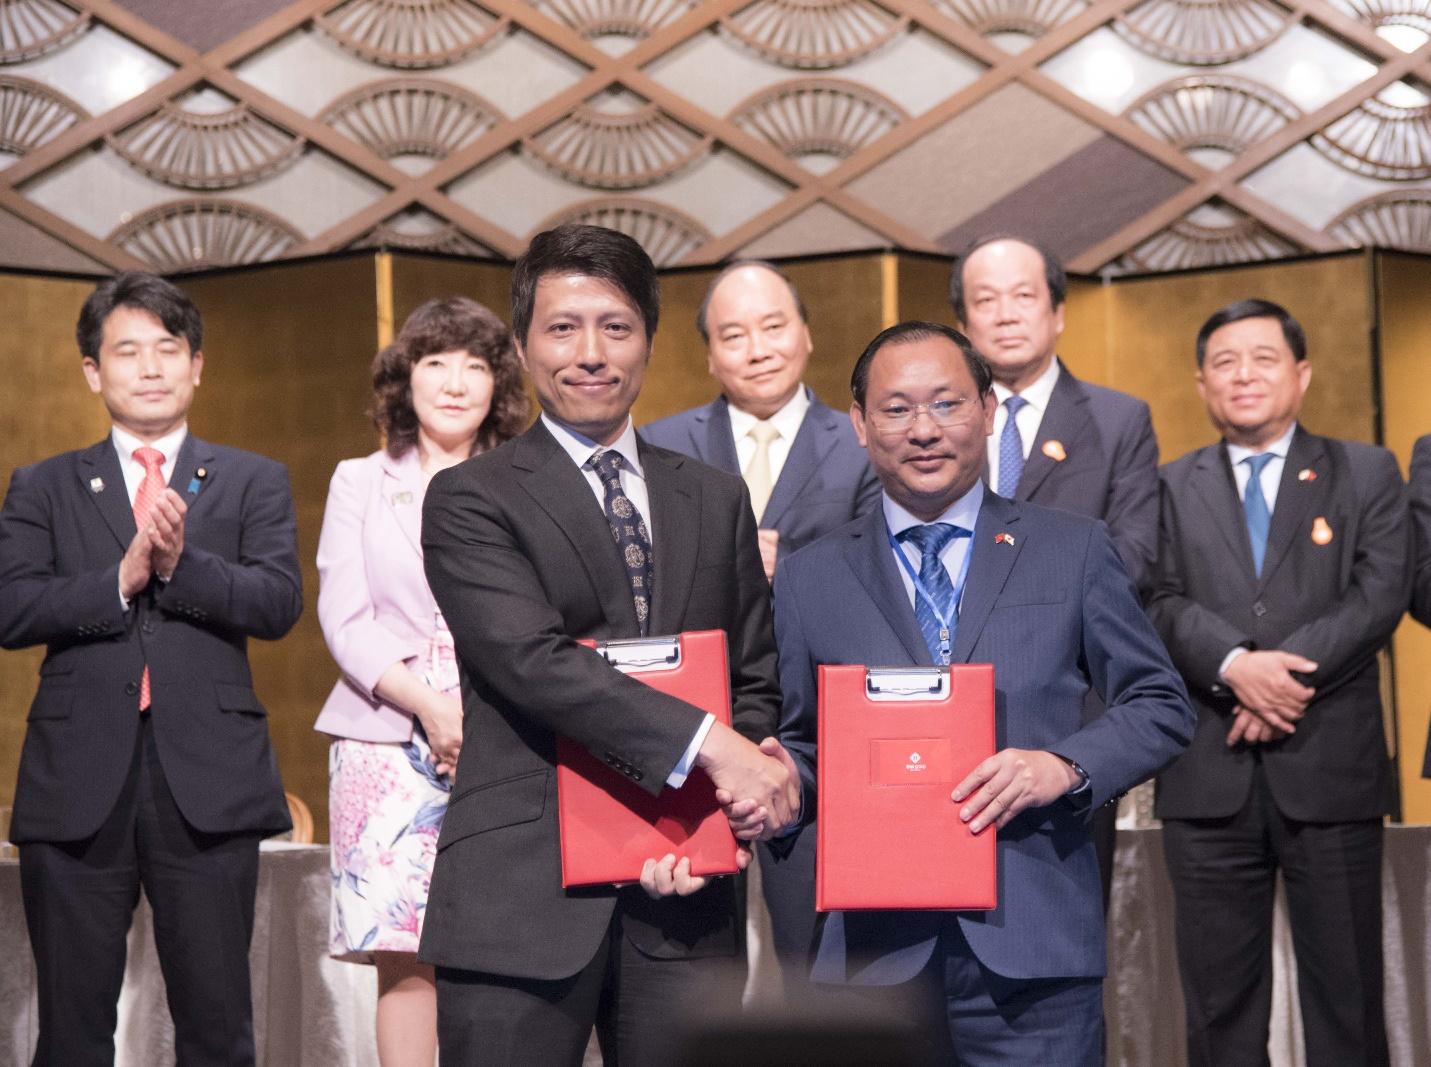 Representatives of Yaegaki and TMS Group at the signing of their MoU in Tokyo on July 1. (Photo: VNA)